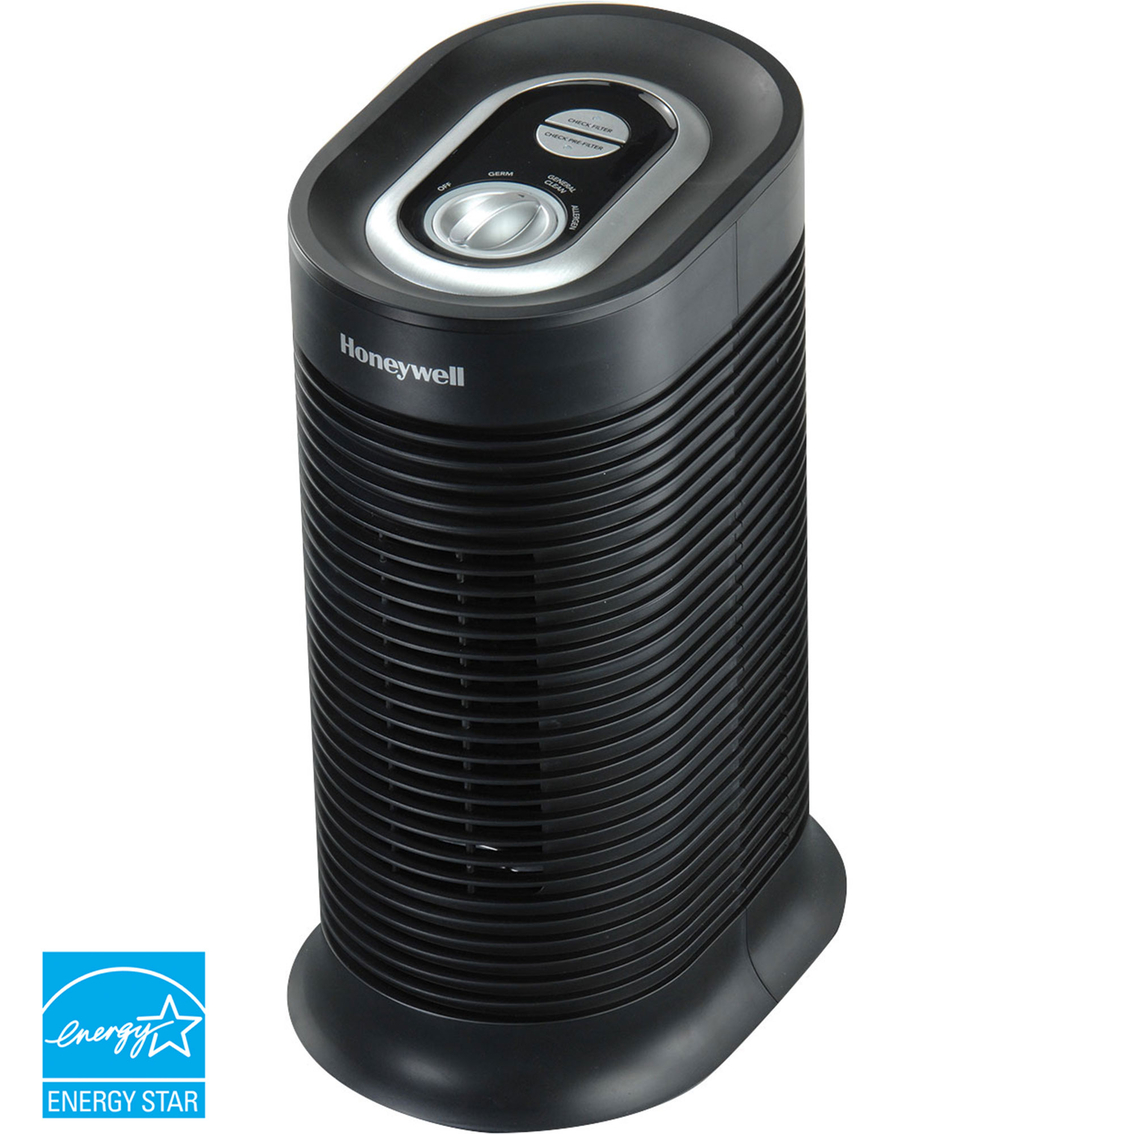 Honeywell True HEPA Compact Tower Air Purifier with Allergen Remover